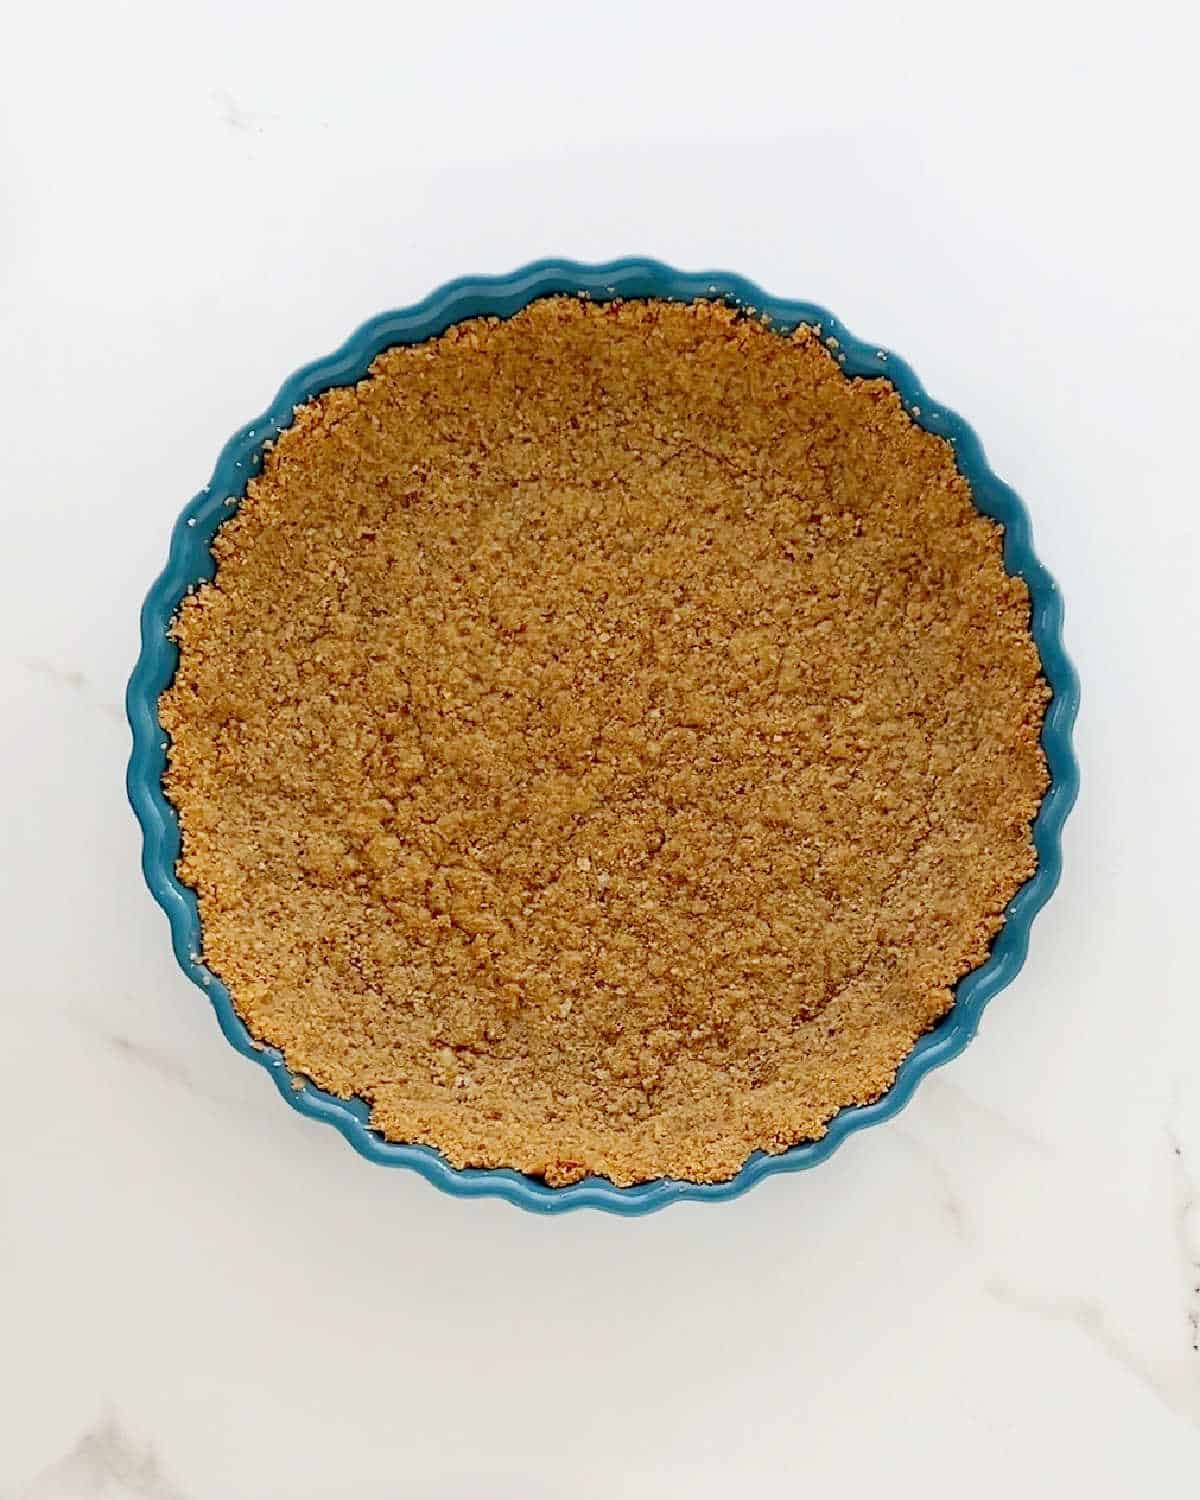 Graham cracker crust on a teal round pie dish. White marbled surface.